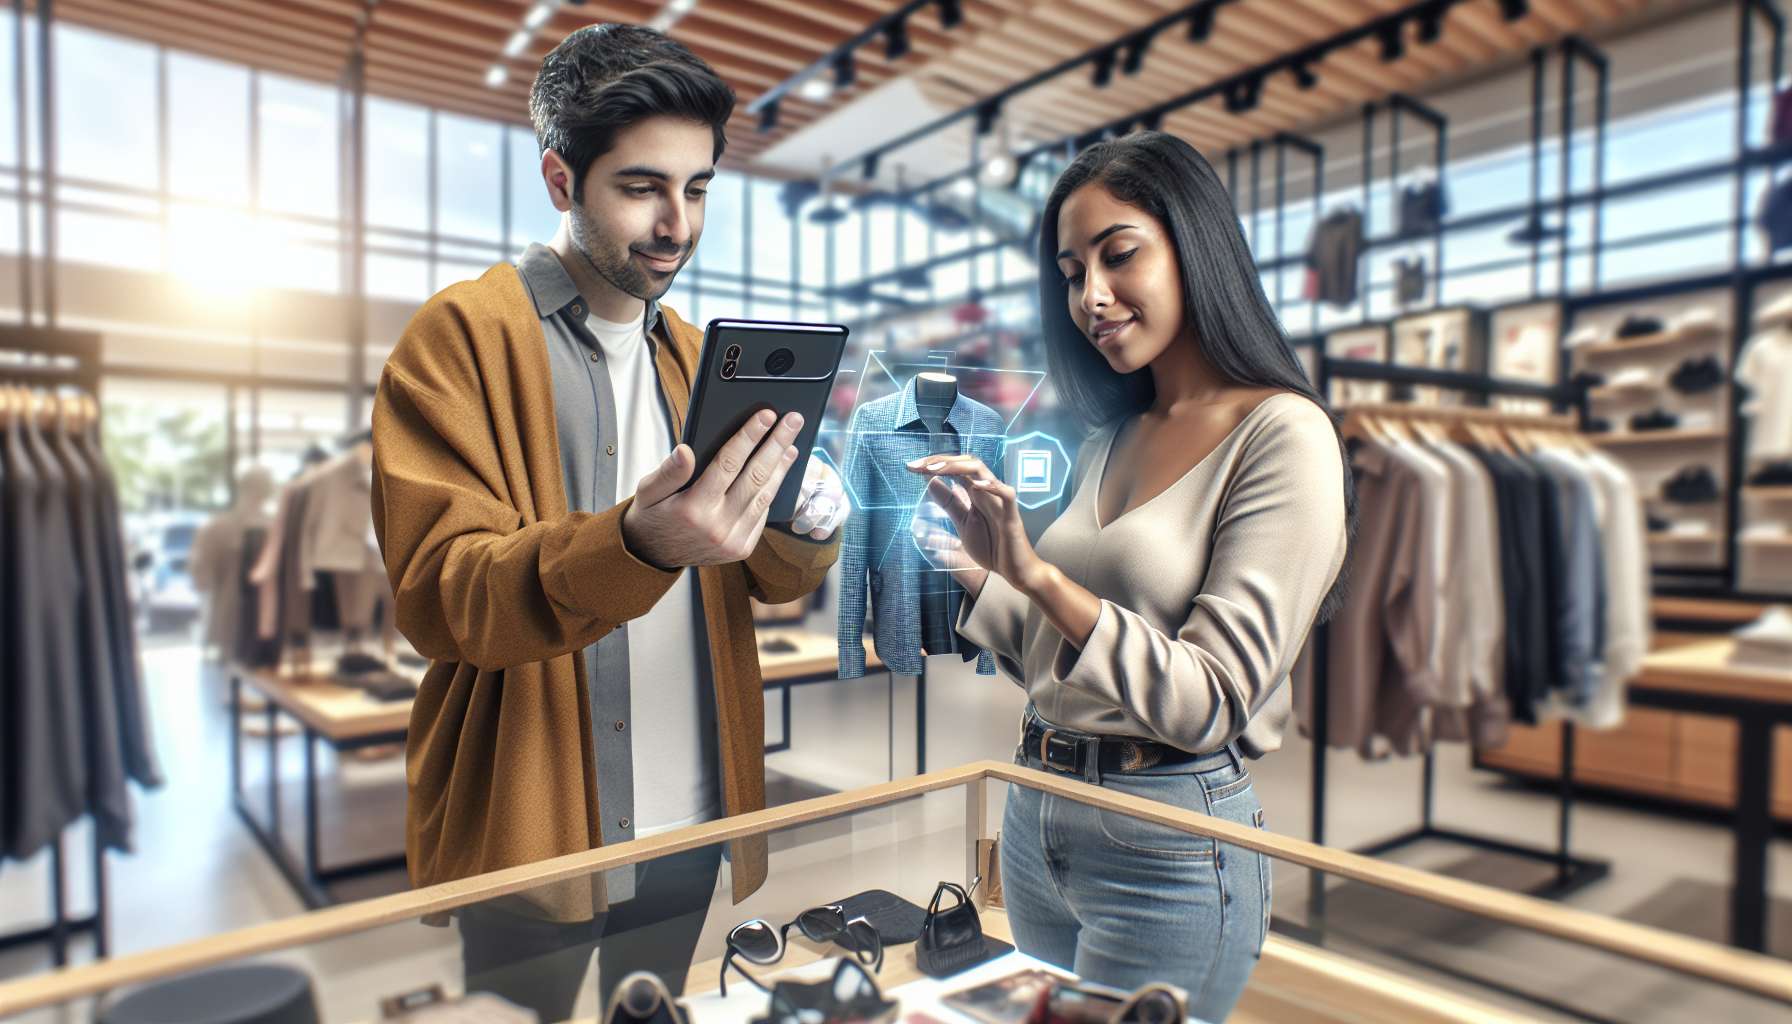 Optimizing the Retail Customer Journey with AR